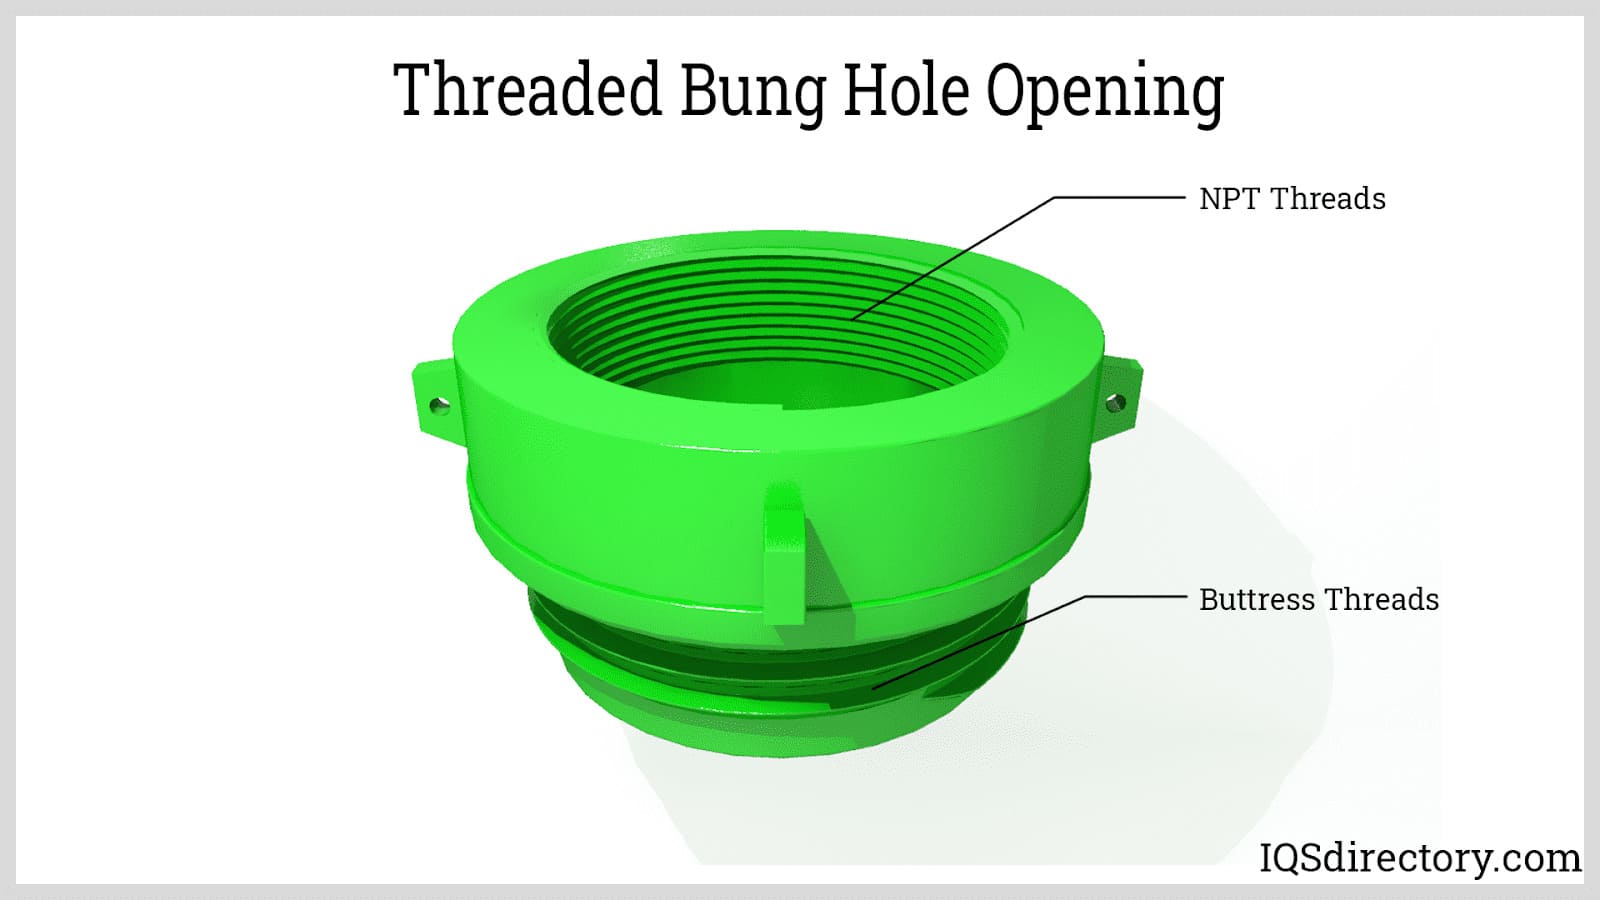 Threaded Bung Hole Opening